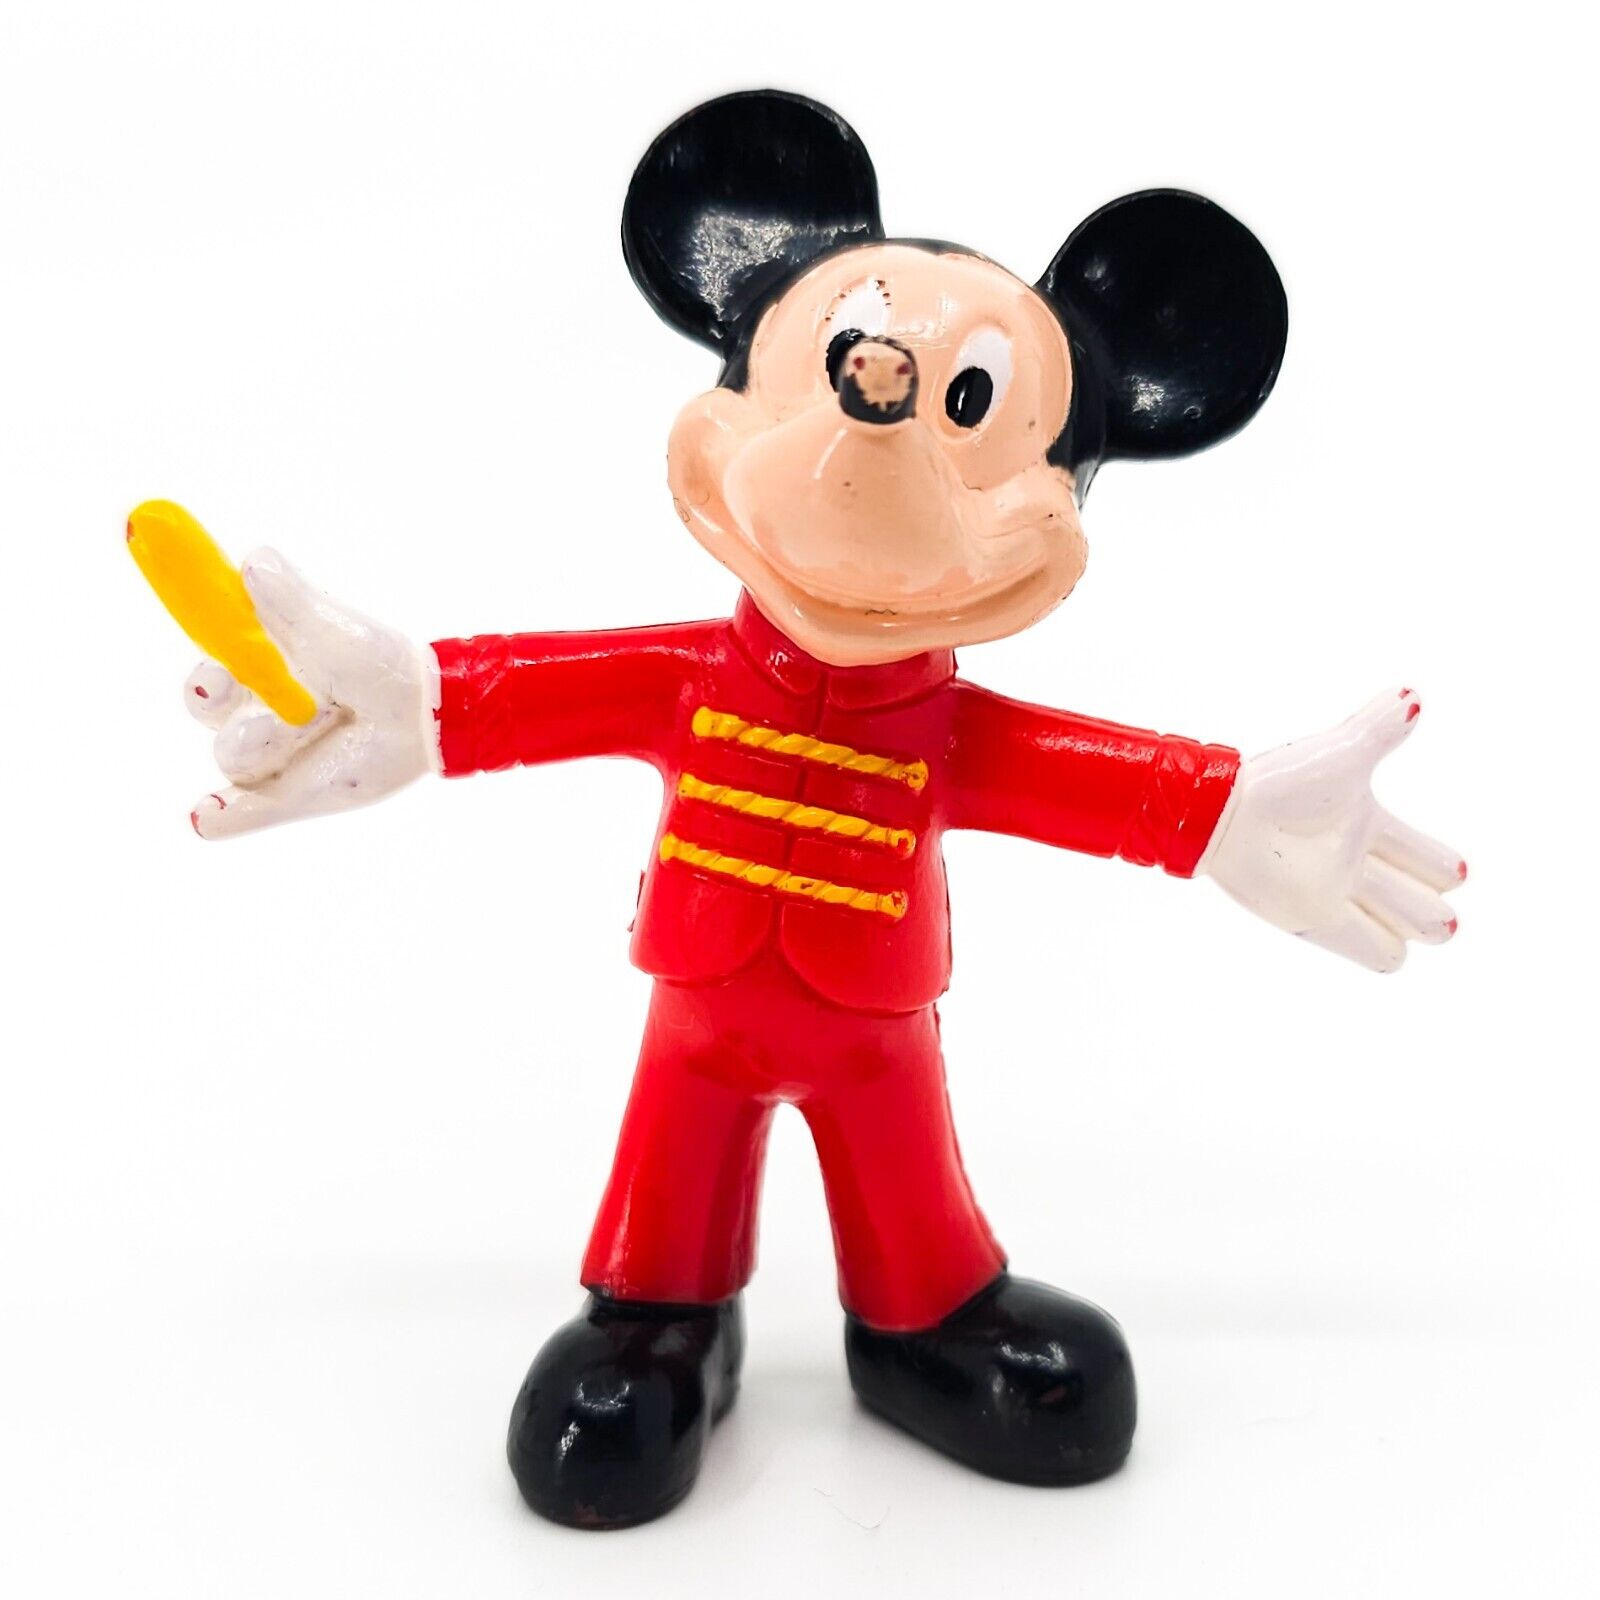 Vintage 1990s Theatre Usher Mickey Mouse 65mm Figure